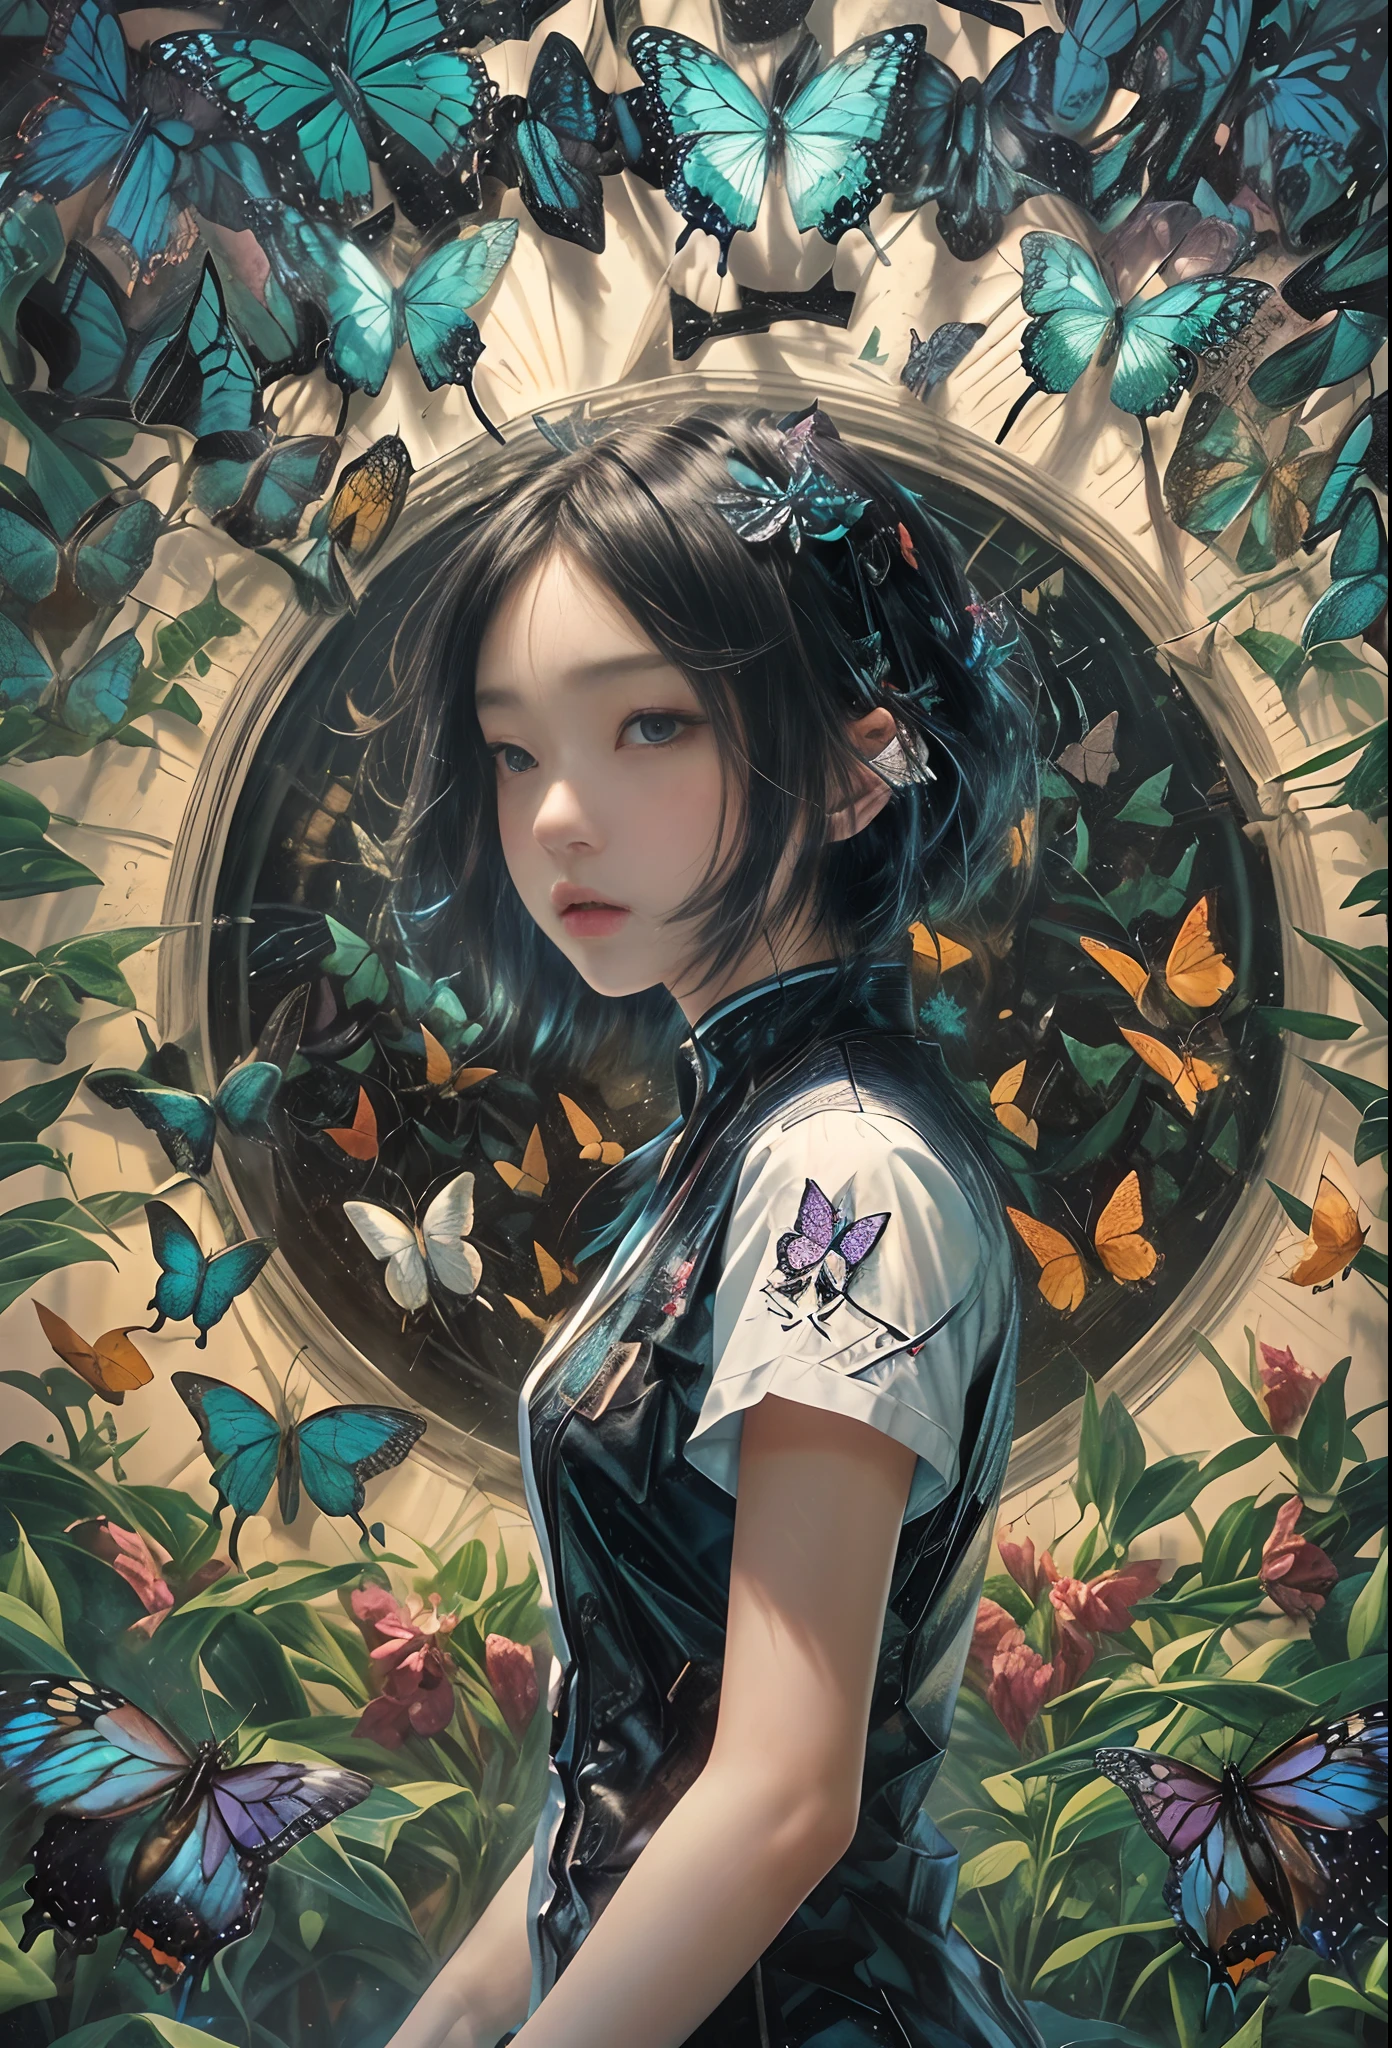 masterpiece, concept art, medium shot, centered, a girl standing in front of a wall of butterfly's, insectarium, cyberpunk art, by Torii Kiyomasu, girl with black hair, james jean style, many eyes on head, official anime still, anime visual of a young girl, chiaki nanami, epic album art cover, atlus, 2 0 2 0 s promotional art, (epic composition, epic proportion), HD